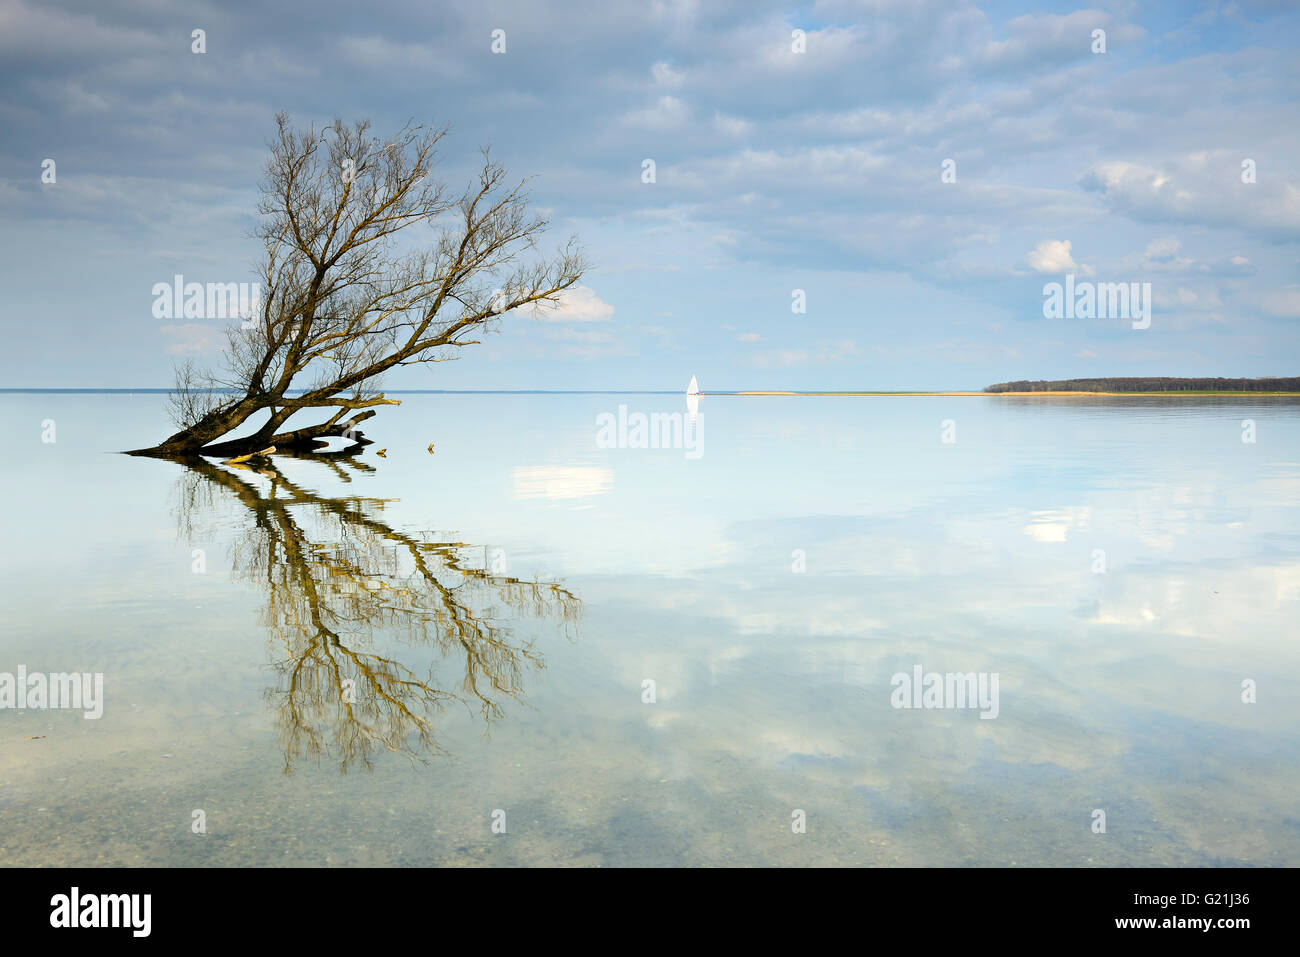 Dry tree trunk lying in the water, clouds are reflected, Müritz, near Röbel, Mecklenburg-Western Pomerania, Germany Stock Photo